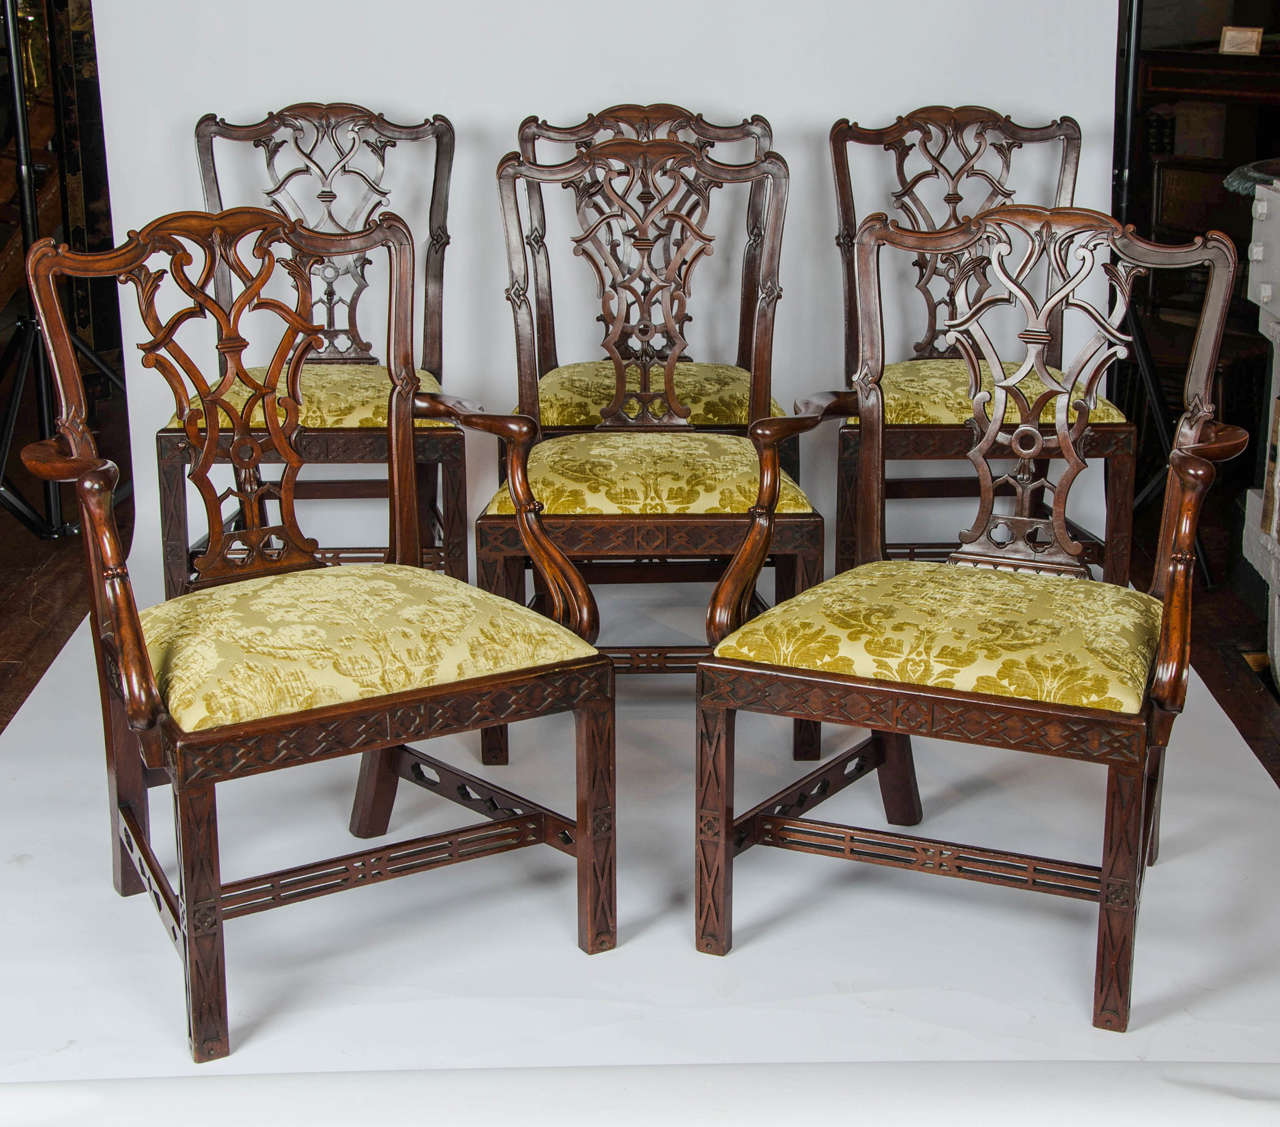 A superb set of six 19th century mahogany centennial dining chairs in the Chippendale style. The intricately carved splat backs above drop-in seats with blind fret moulded frame and legs and pierced stretchers and arms.